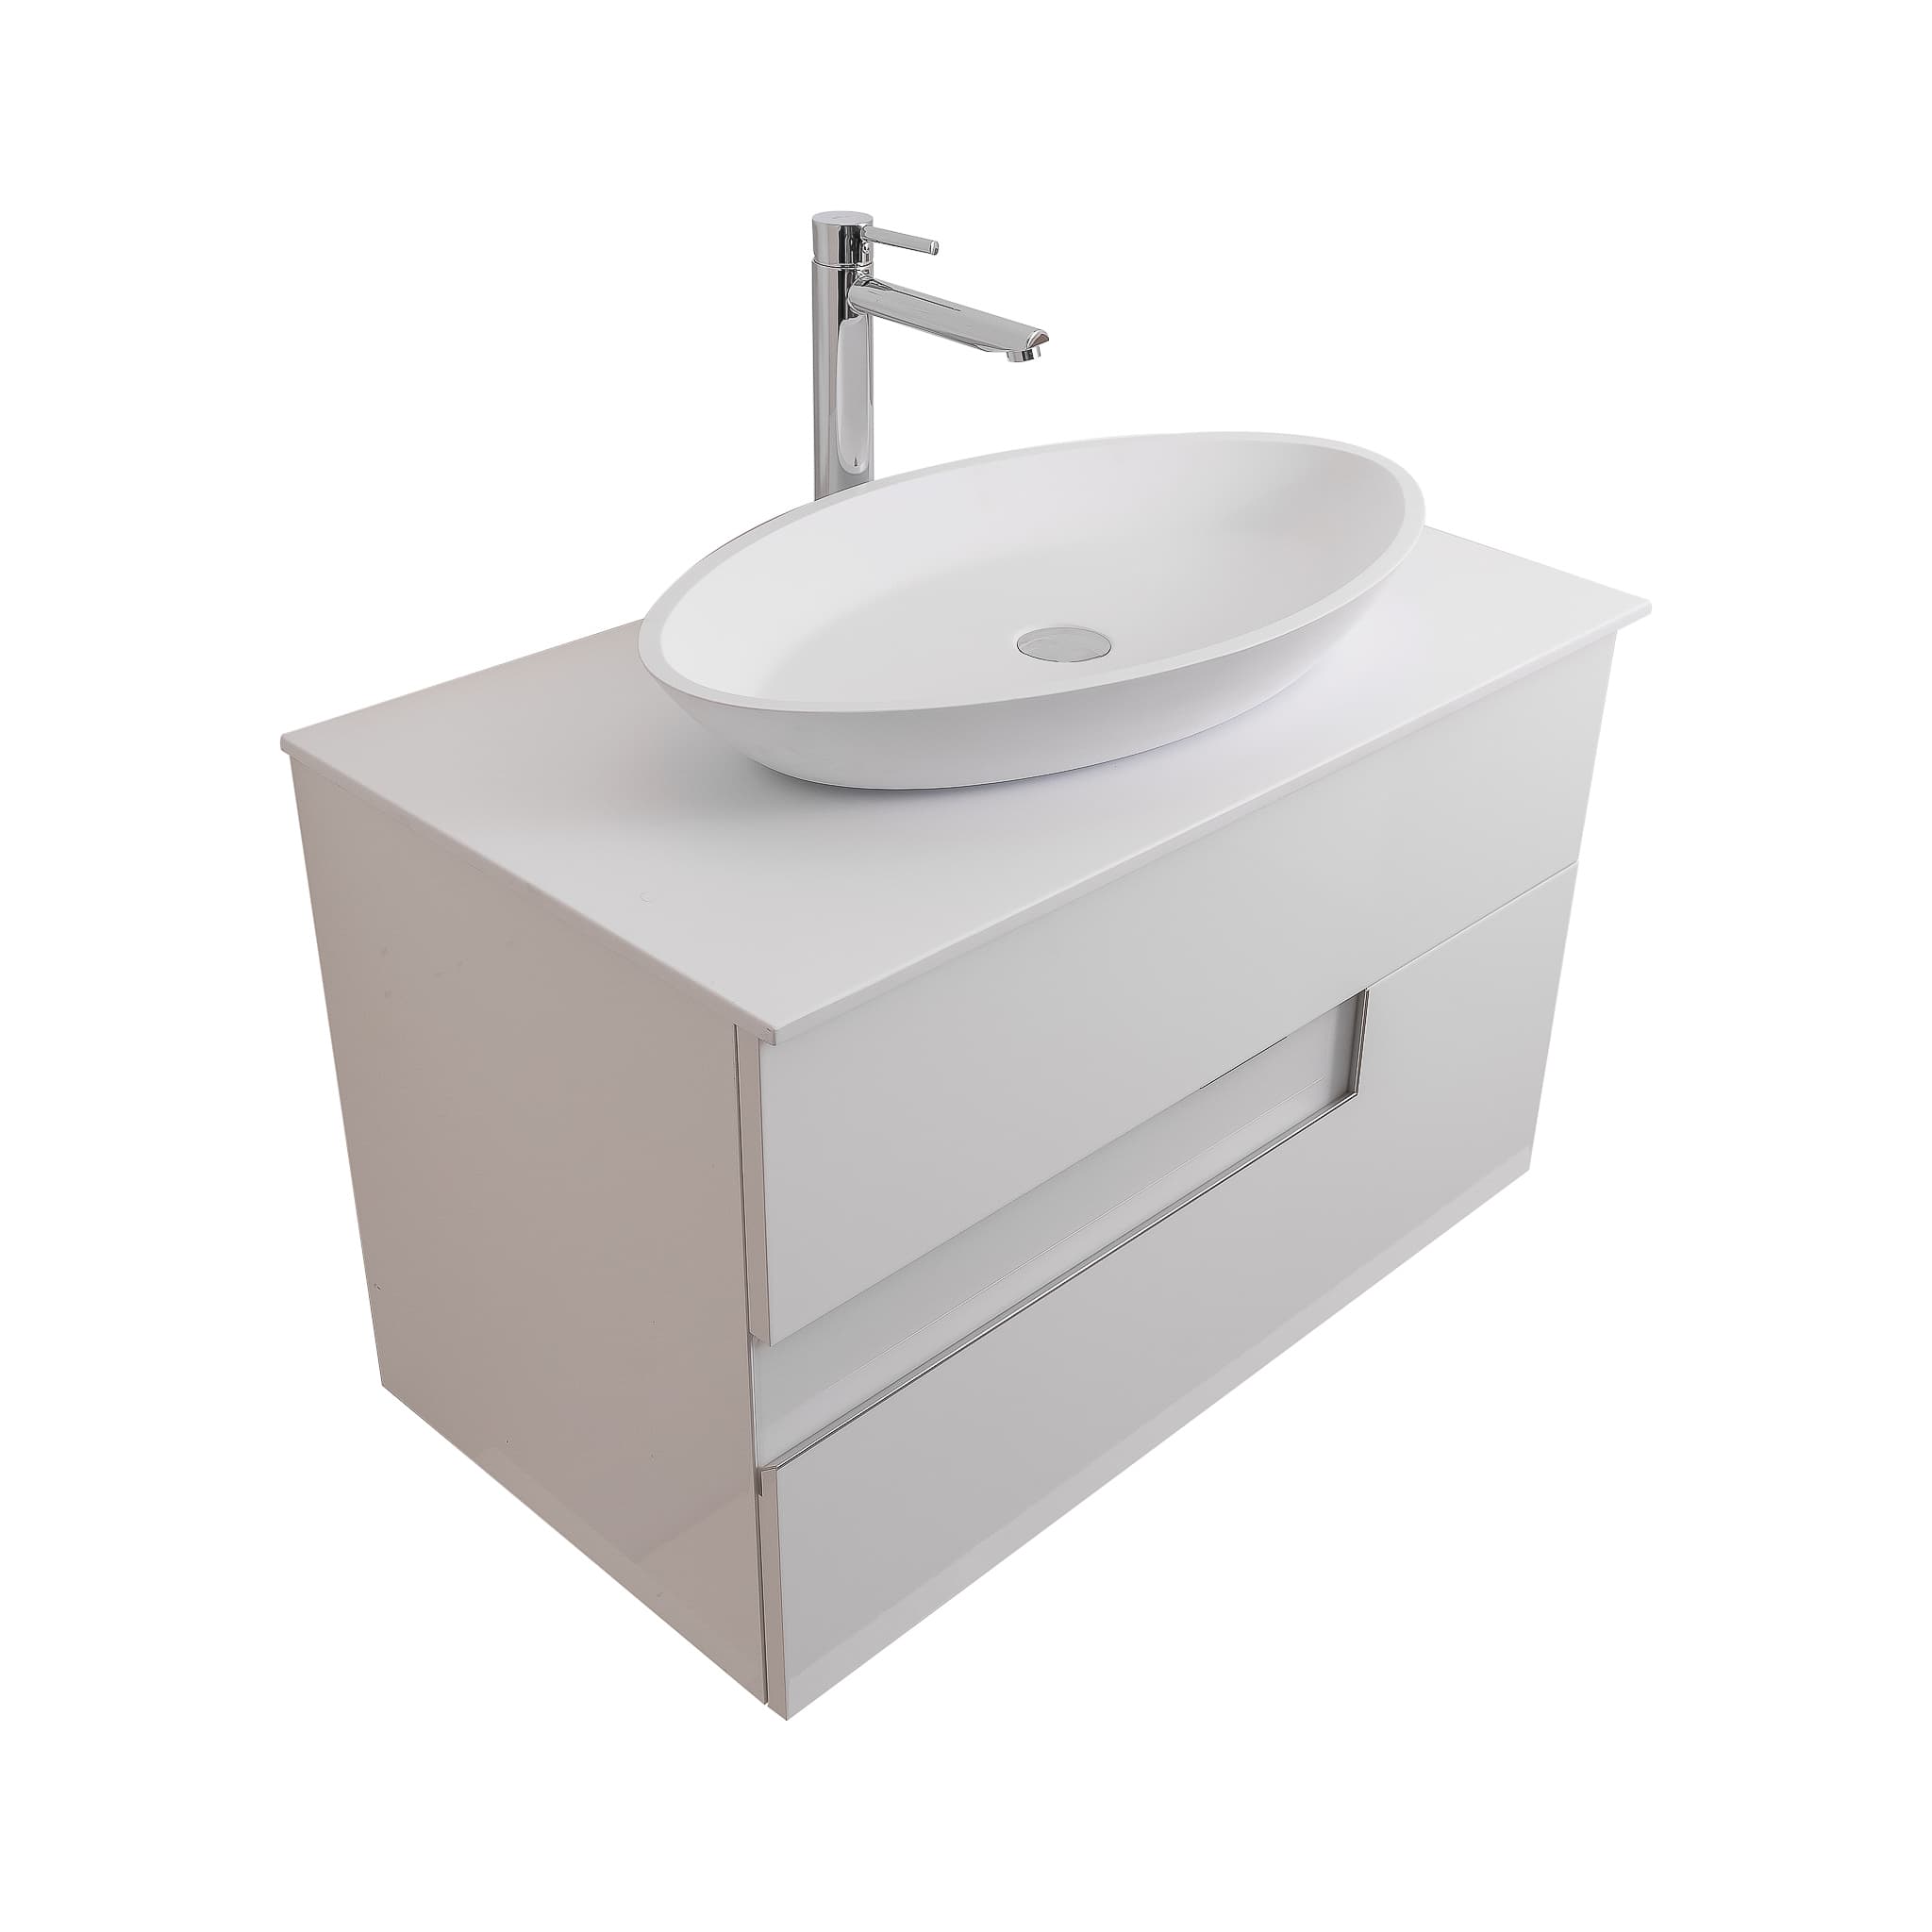 Vision 35.5 White High Gloss Cabinet, Solid Surface Flat White Counter And Oval Solid Surface White Basin 1305, Wall Mounted Modern Vanity Set